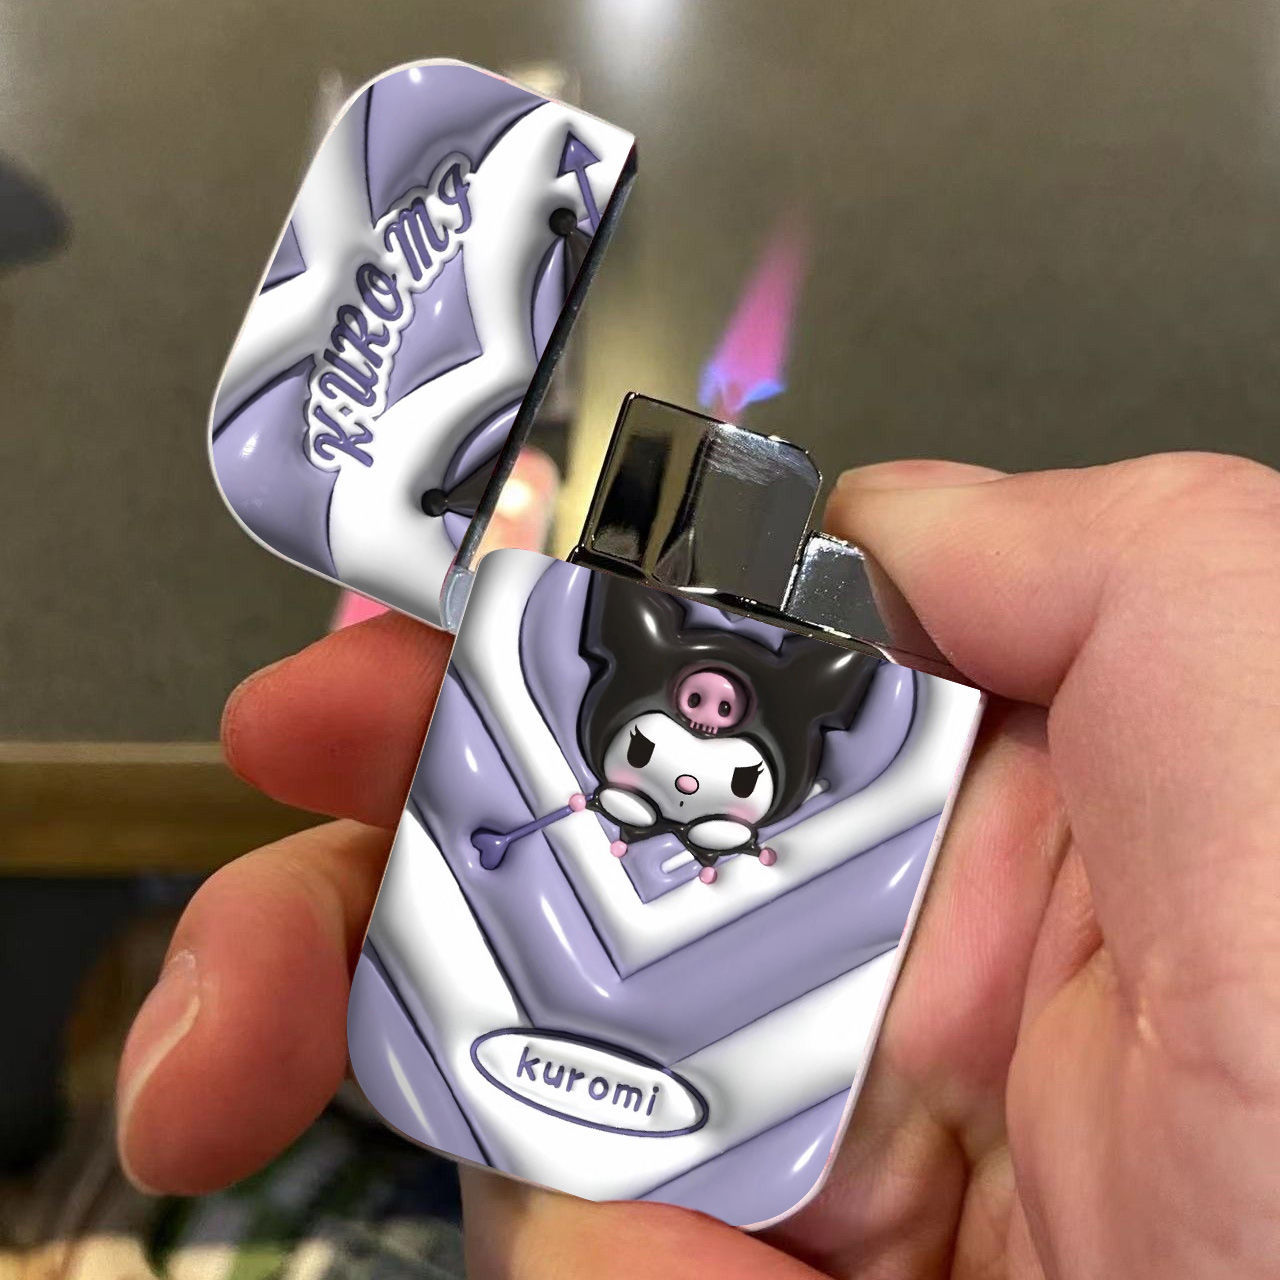 3d Clow M Cute Pink Flame Gas Transparent Lighter Ins Girl Good-looking Creative Windproof